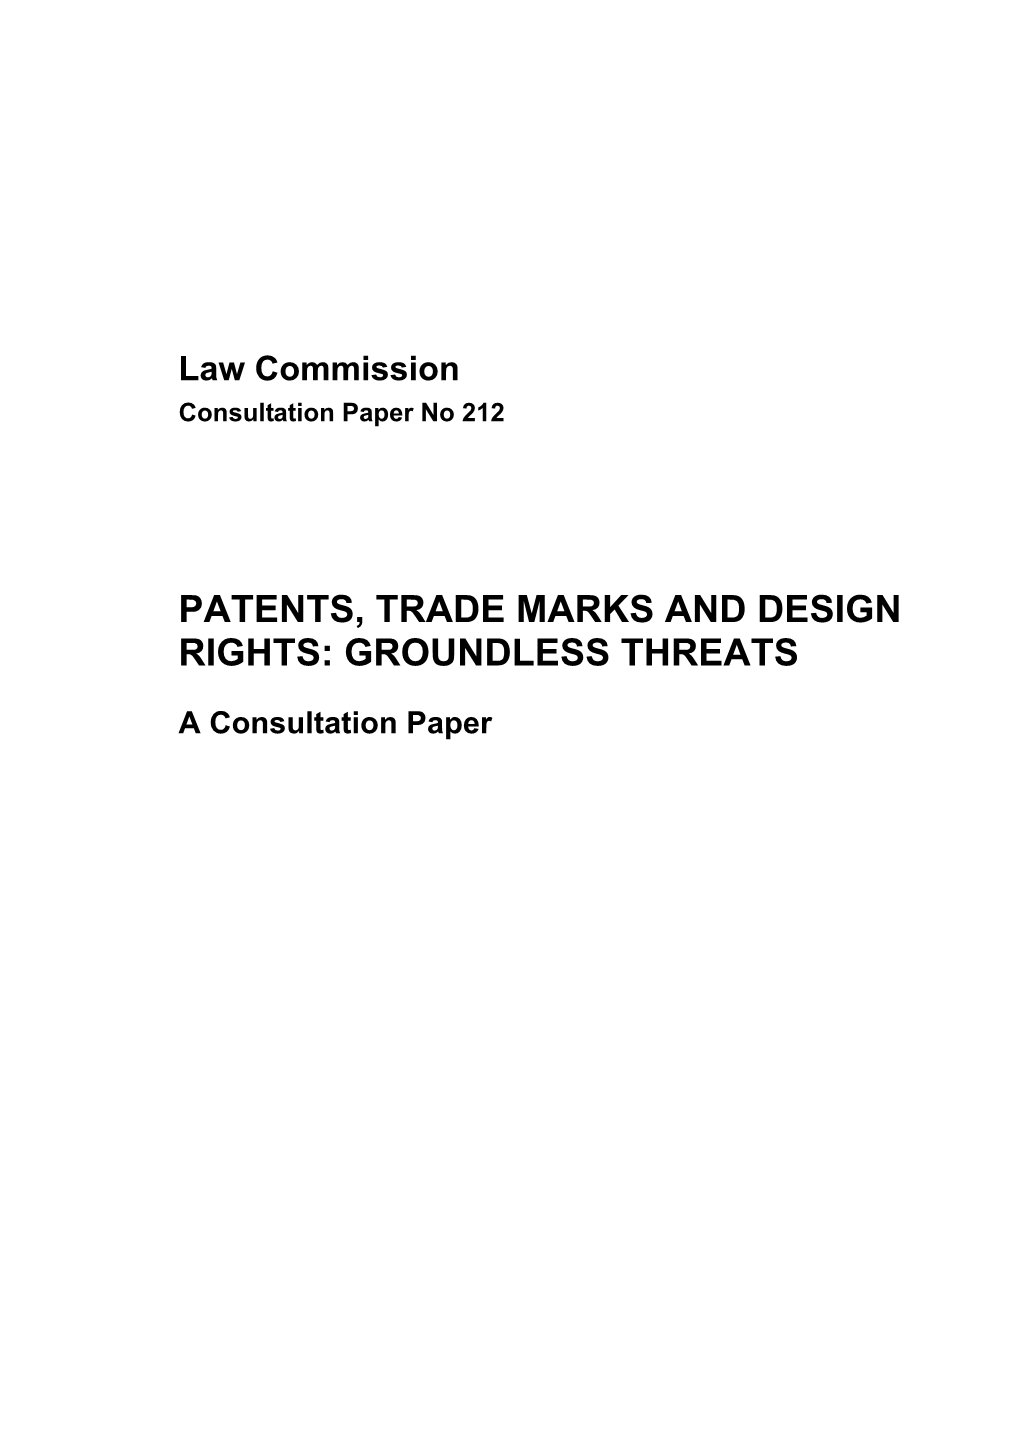 Patents, Trade Marks and Design Rights: Groundless Threats